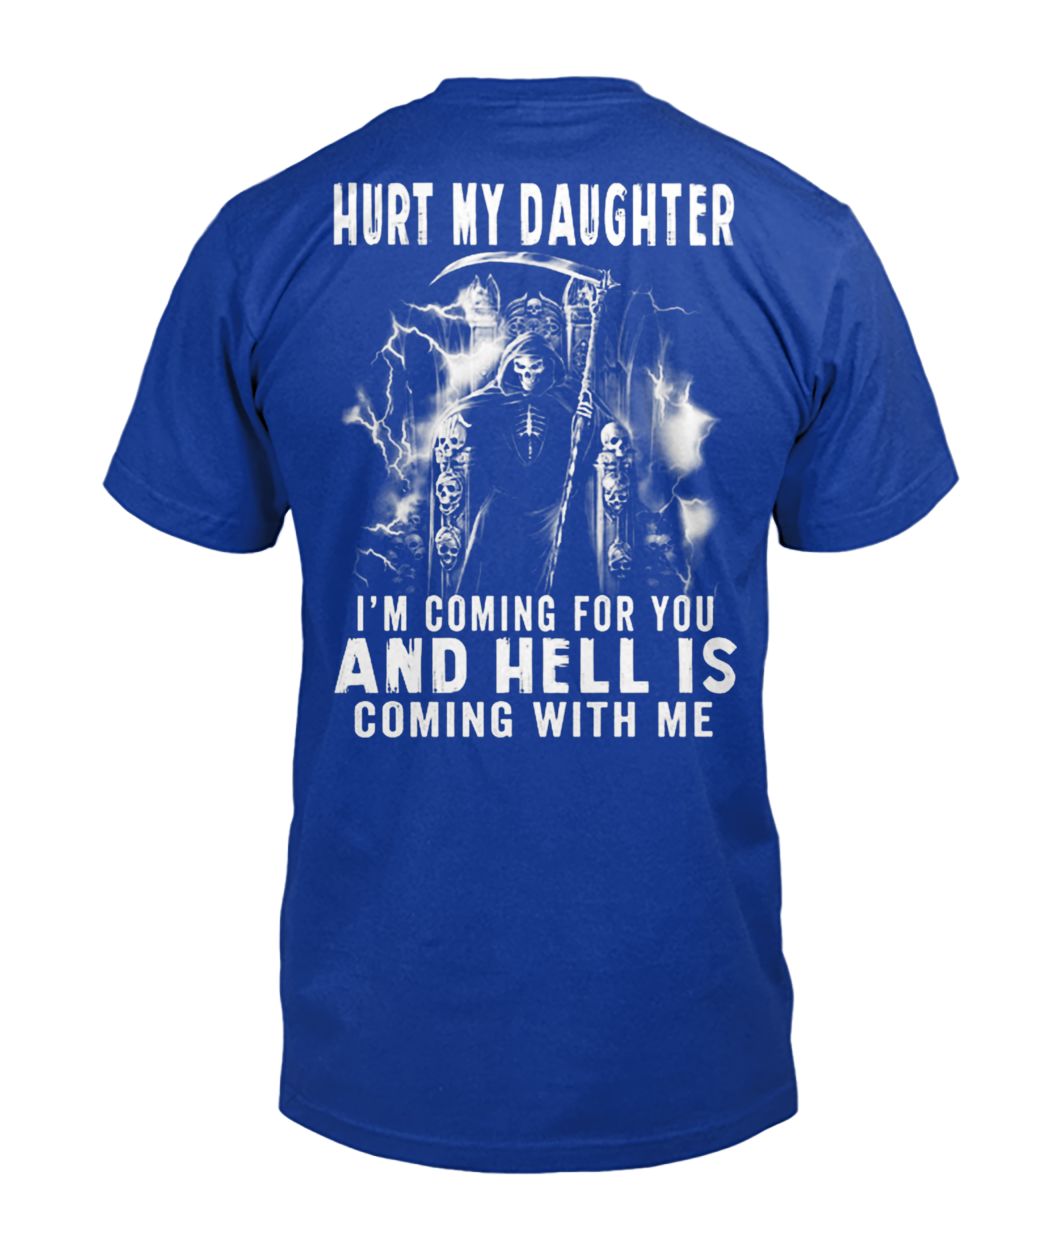 Hurt my daughter I'm coming for you and hell is coming with me mens v-neck